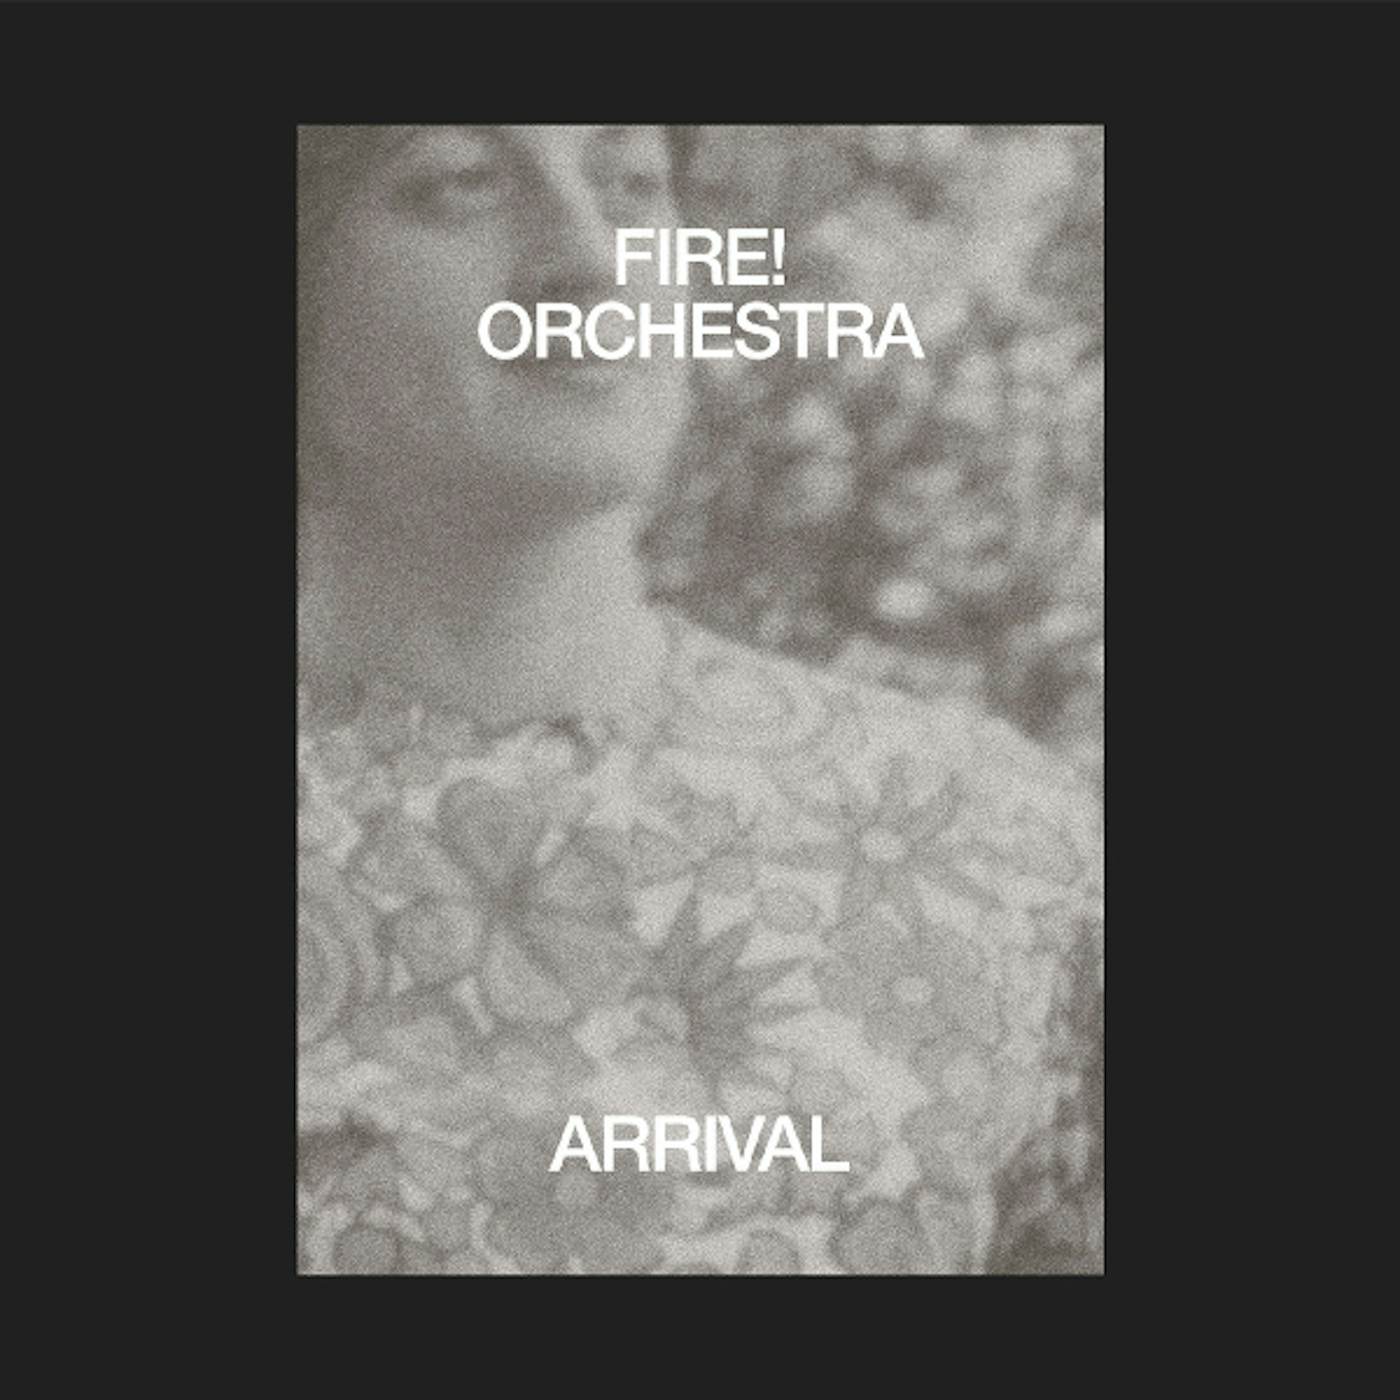 Fire! Orchestra ARRIVAL CD